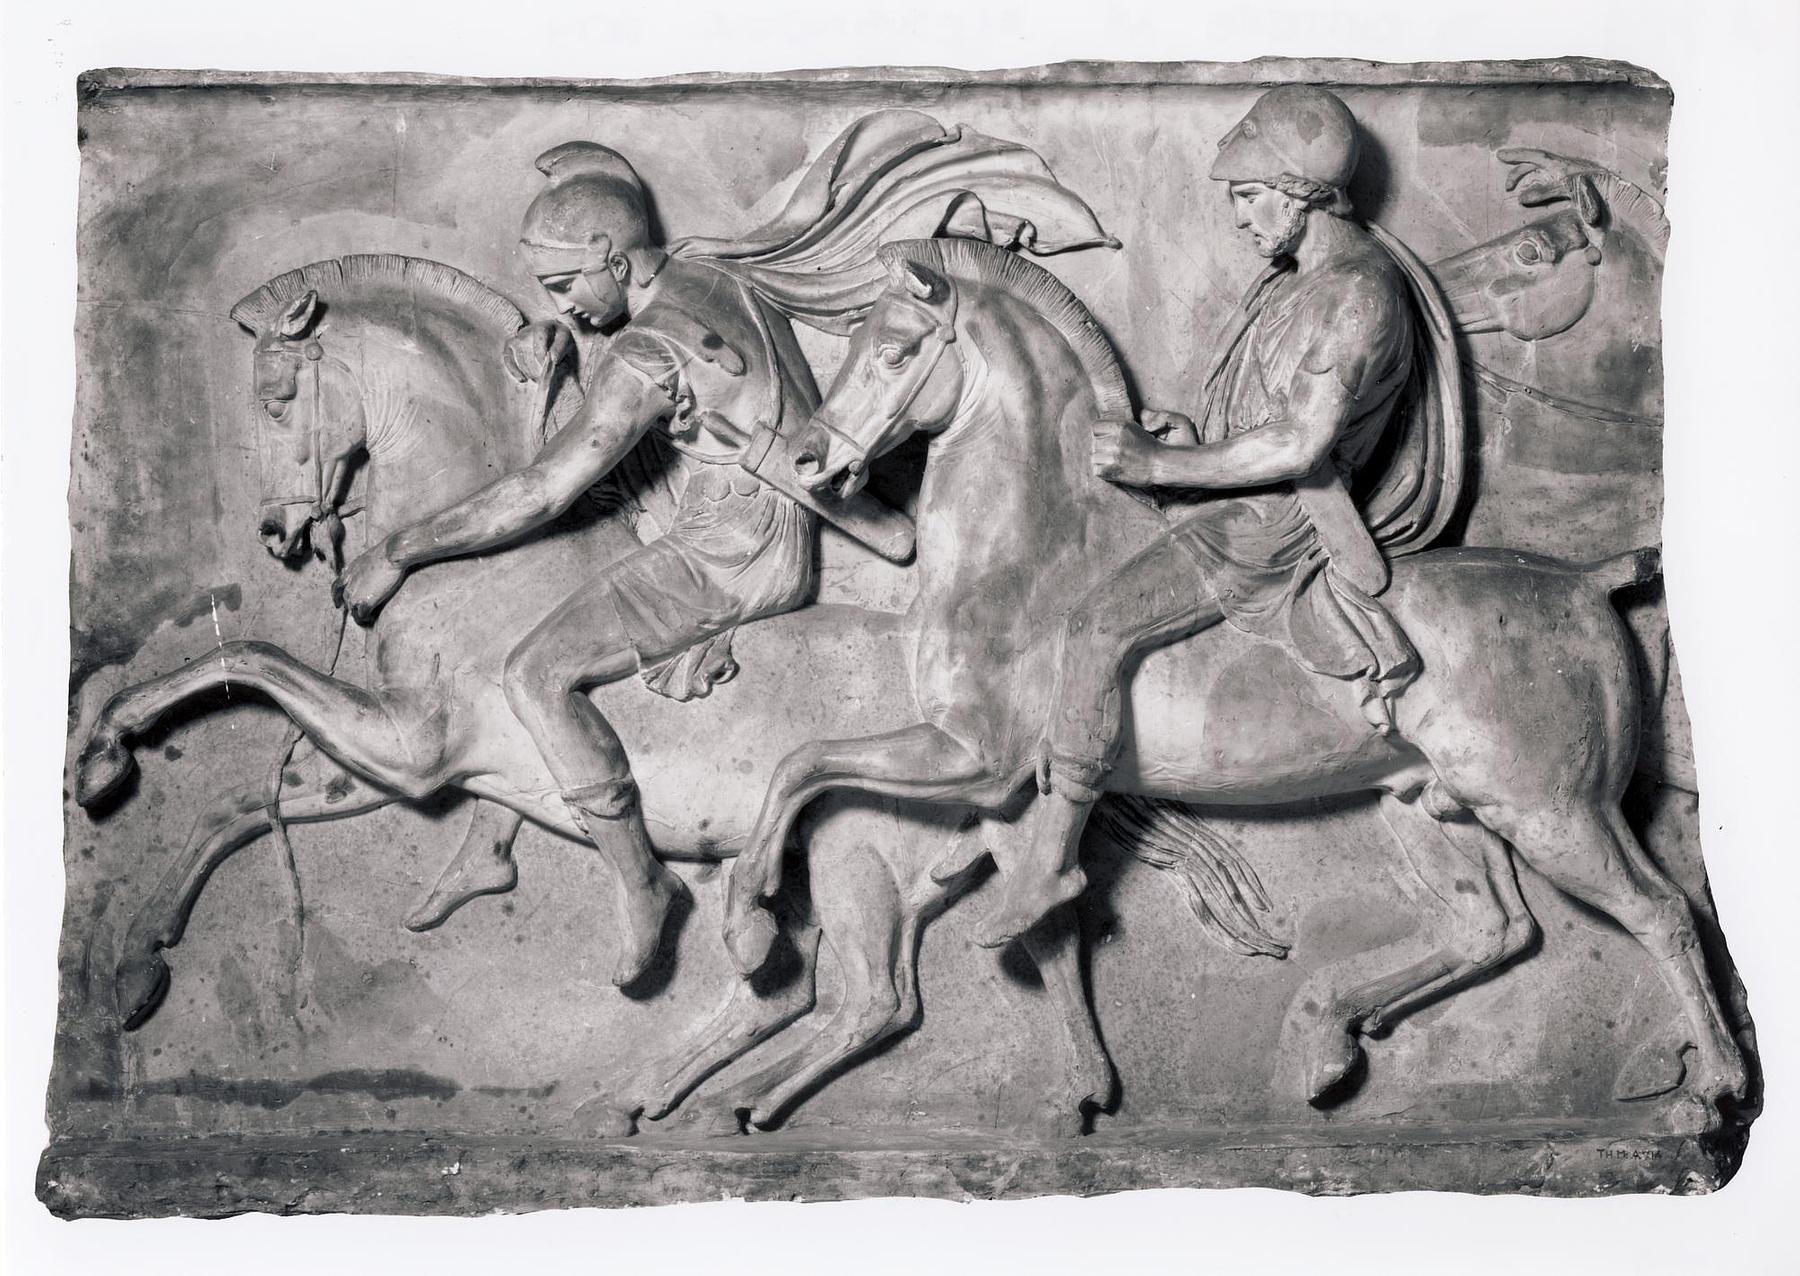 Two men on horseback in Alexander the Great's train, A714